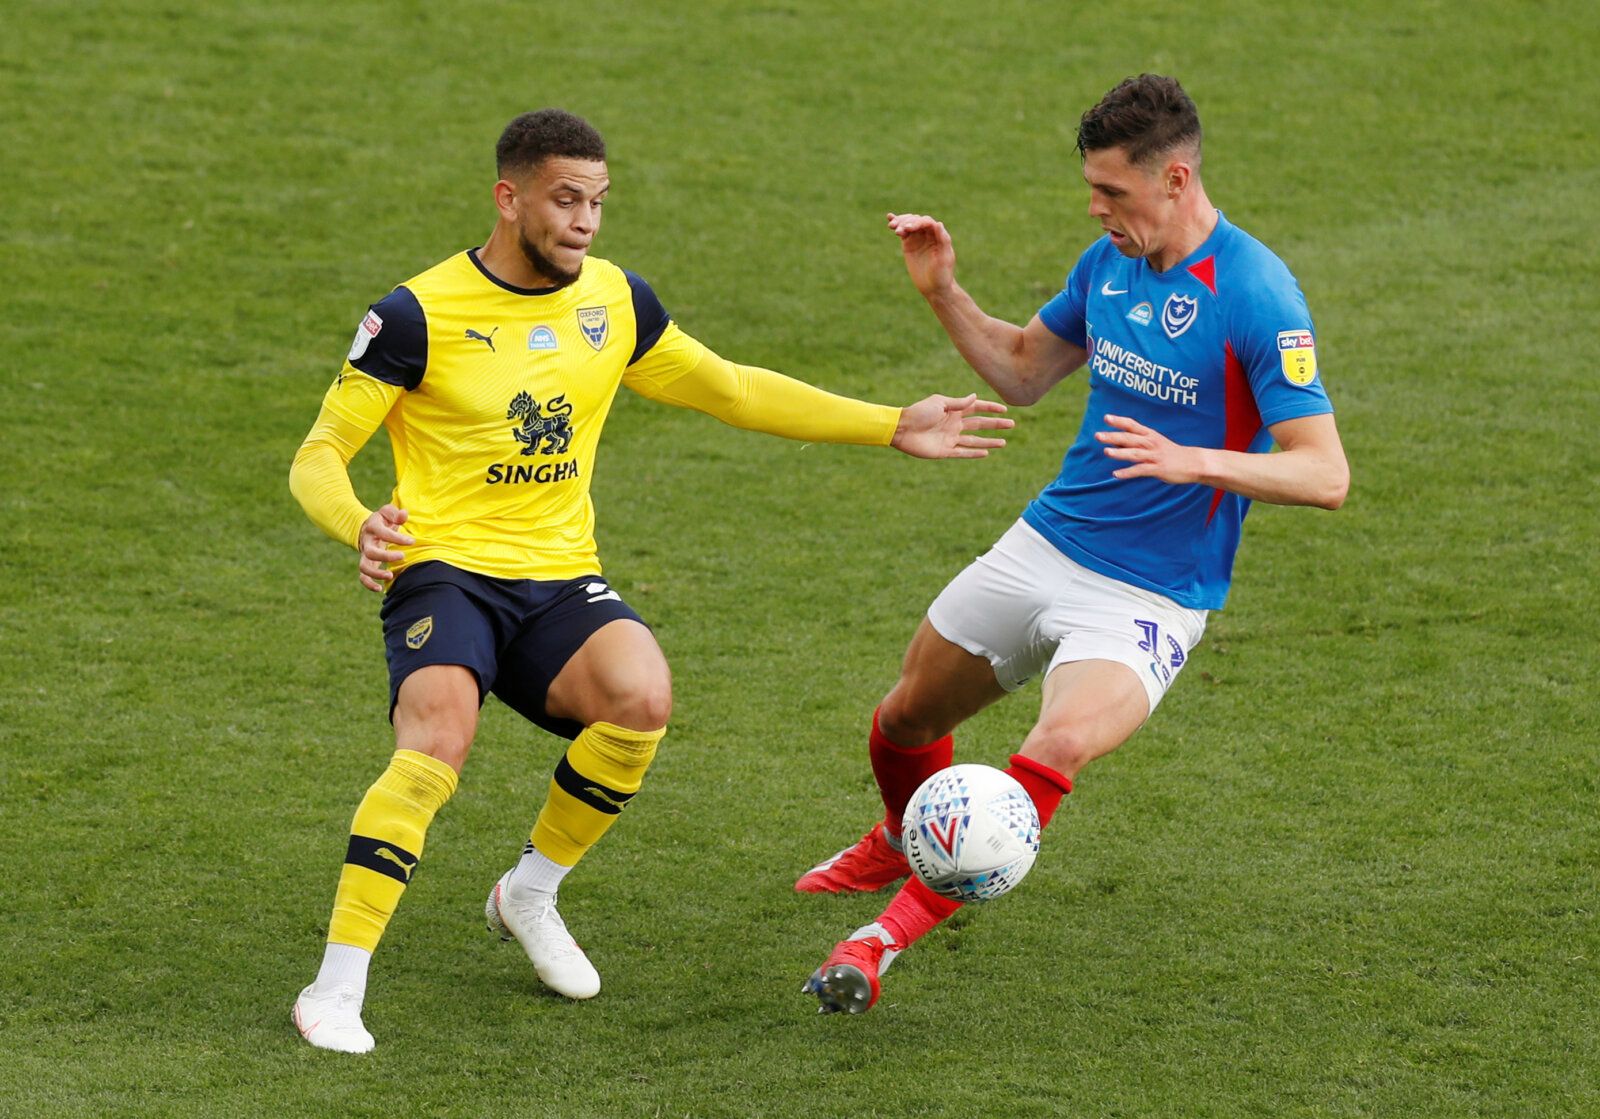 Soccer Football - League One Play Off Semi Final Second Leg - Oxford United v Portsmouth - Kassam Stadium, Oxford, Britain - July 6, 2020  Oxford's Marcus Browne in action with Portsmouth's James Bolton, as play resumes behind closed doors following the outbreak of the coronavirus disease (COVID-19)  Action Images/Matthew Childs  EDITORIAL USE ONLY. No use with unauthorized audio, video, data, fixture lists, club/league logos or 